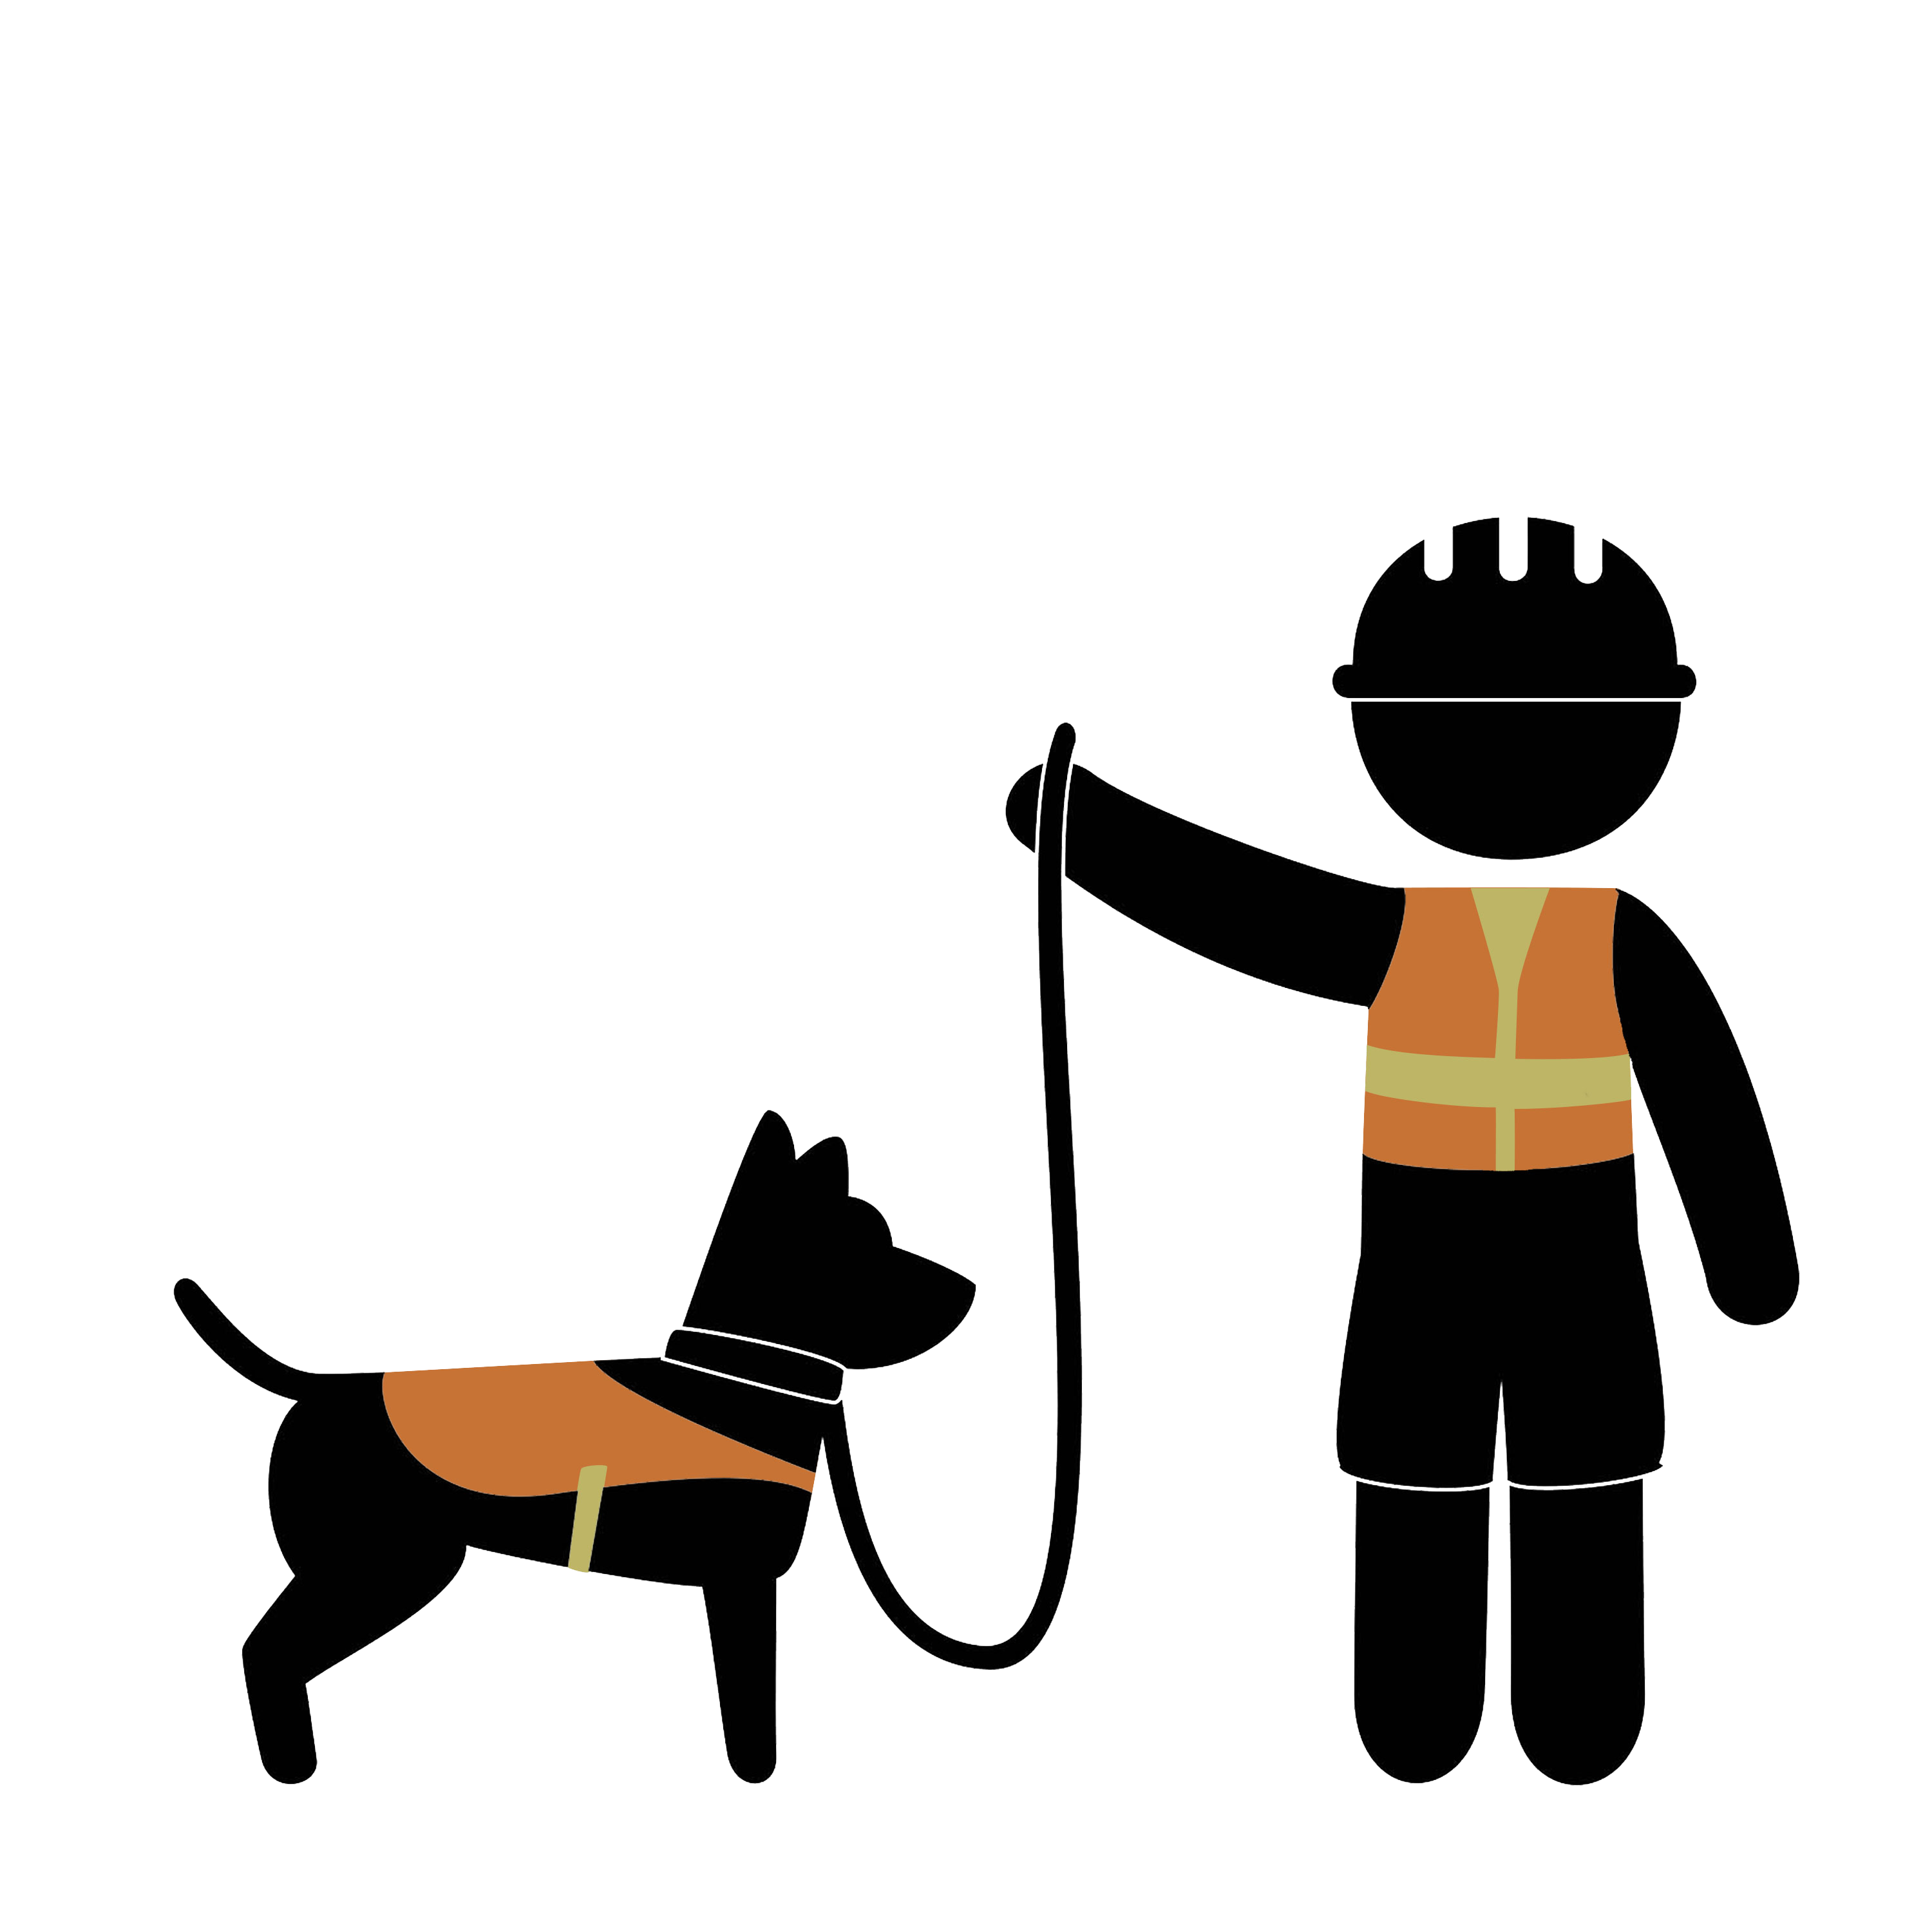 Flagboy and Flagdog characters in colored vests